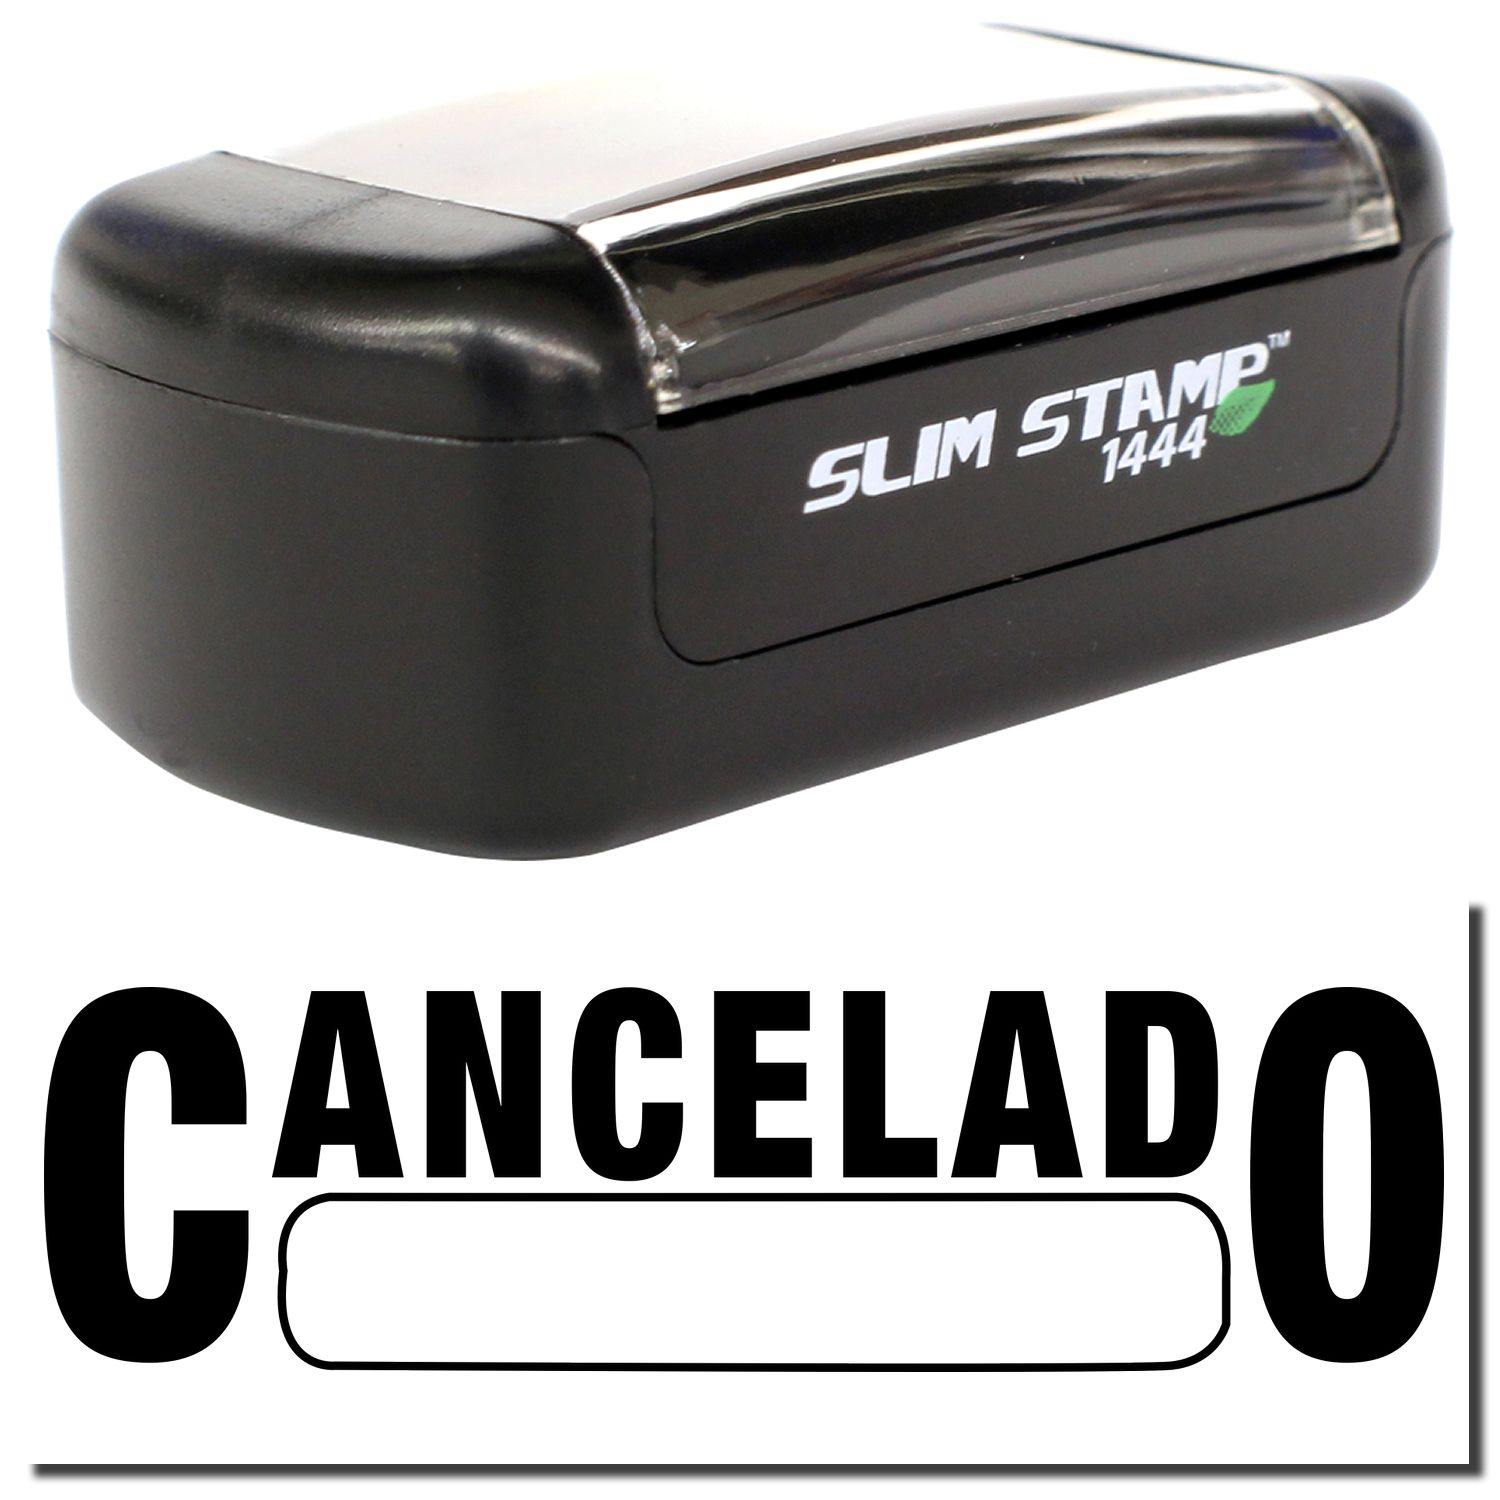 A stock office pre-inked stamp with a stamped image showing how the text "CANCELADO" with a box is displayed after stamping.